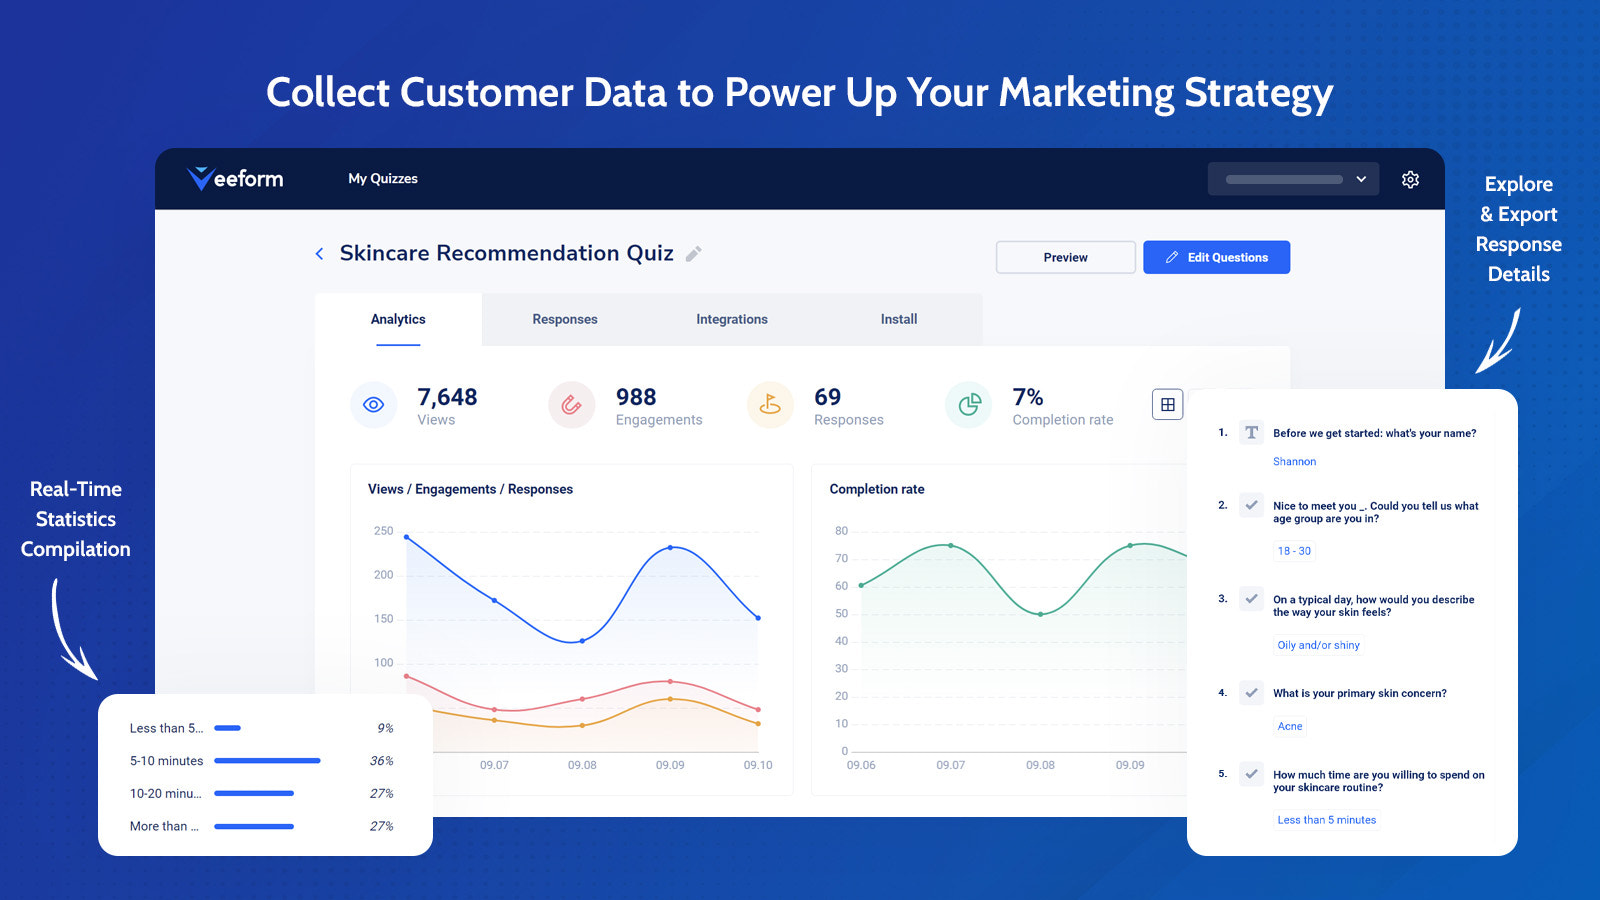 Collect customer data to power up your marketing strategy